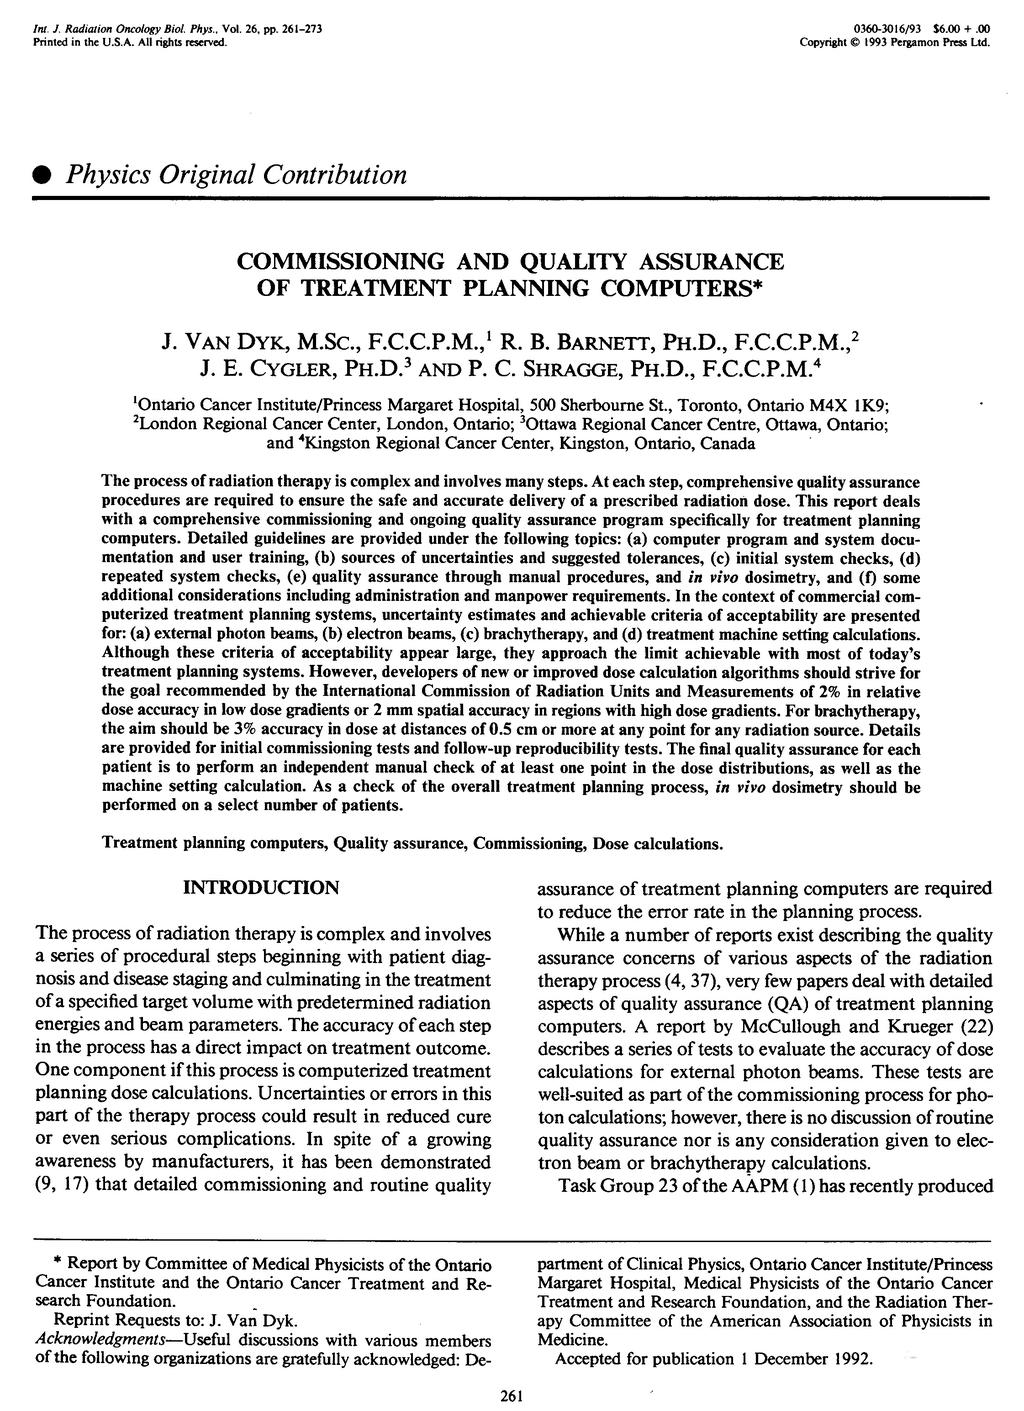 Introduction n Van Dyk et al.: Commissioning and QA of Treatment Planning Computers.